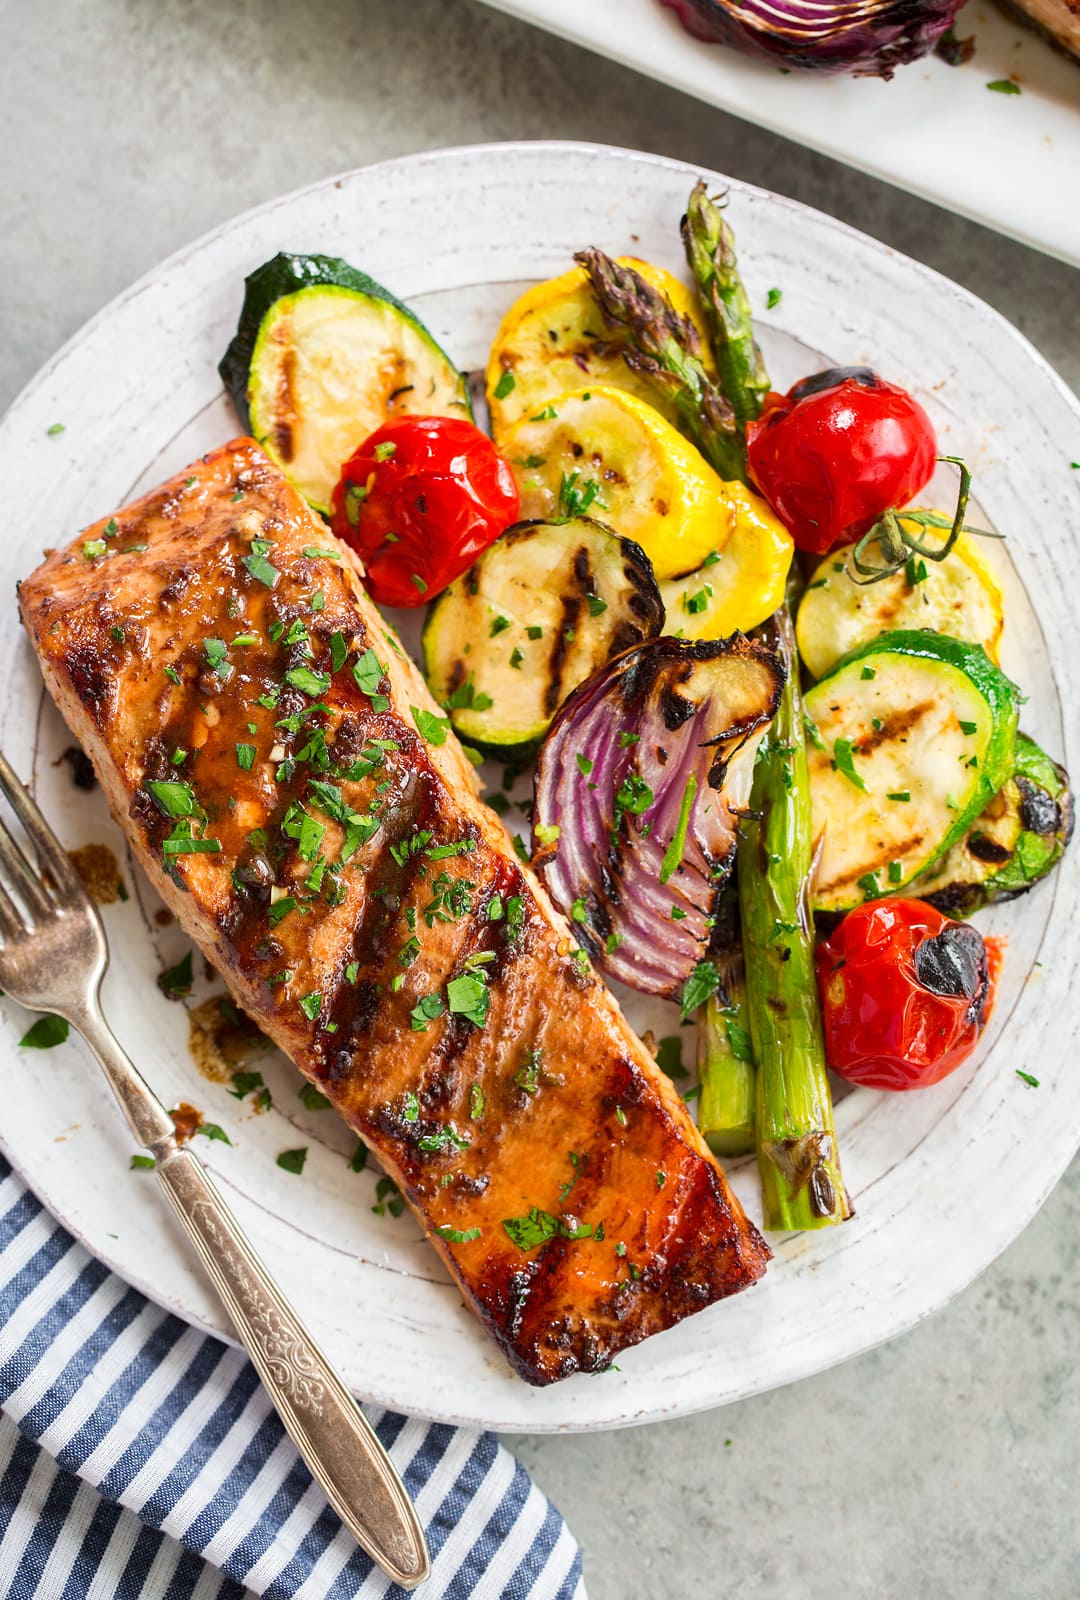 Grilled Salmon and roasted vegetables